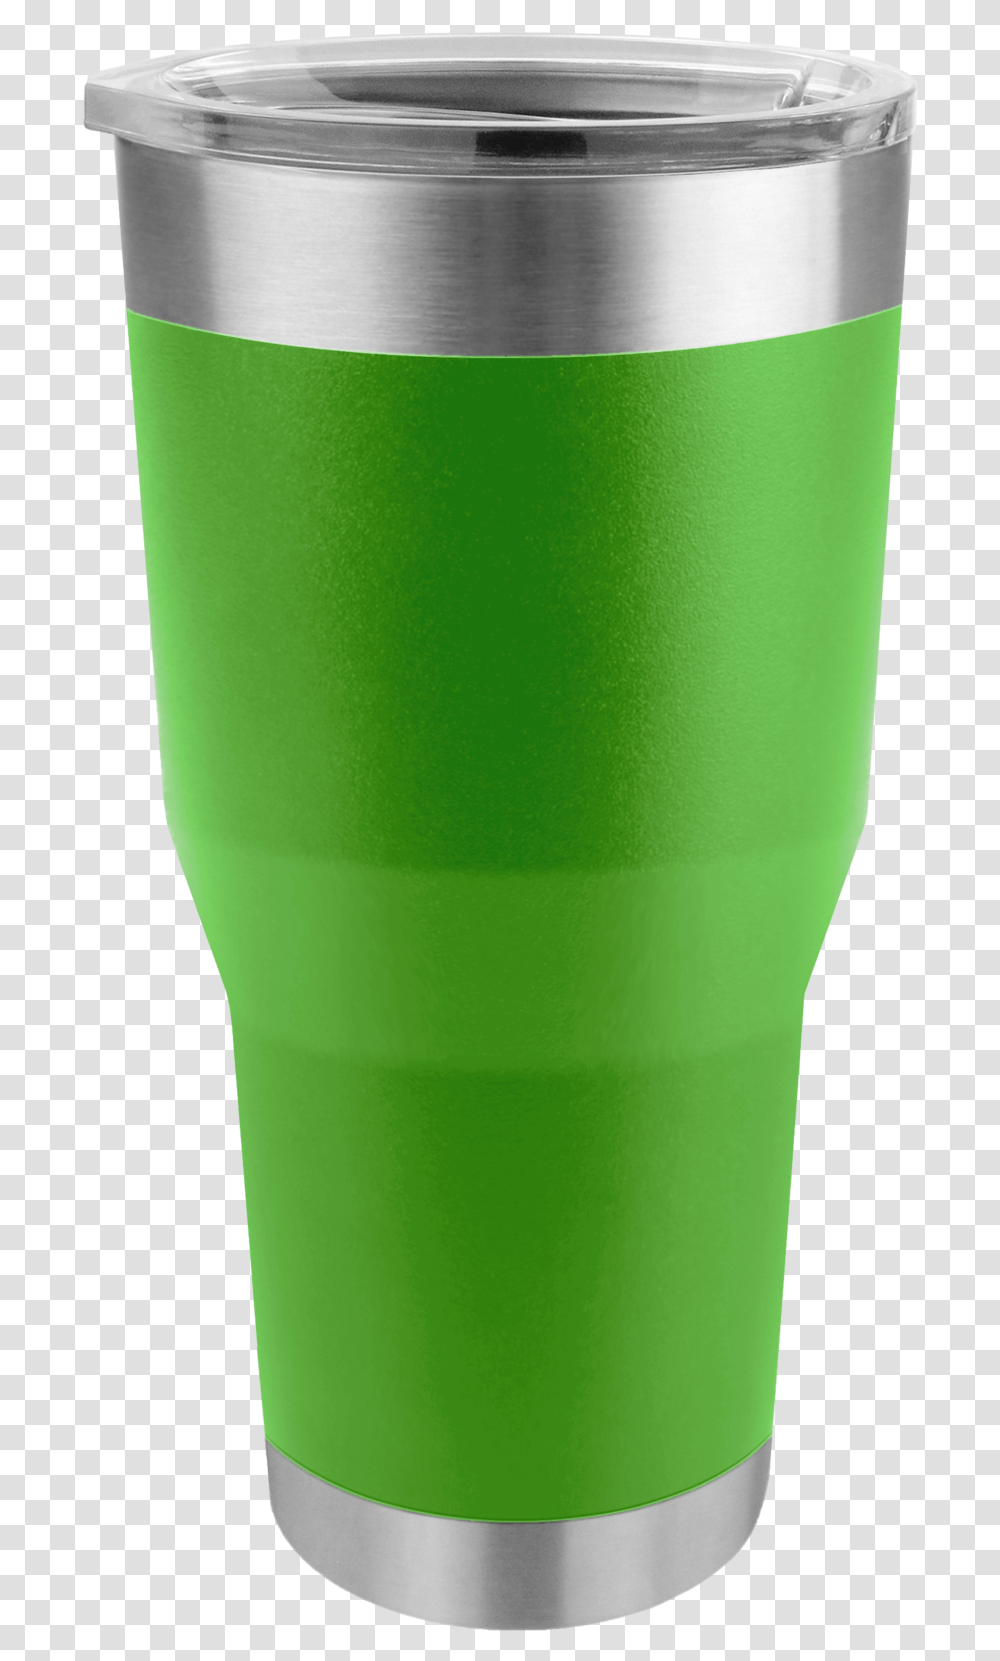 TempercraftClass Lazyload Lazyload Fade In Cloudzoom Caffeinated Drink, Shaker, Bottle, Cup, Coffee Cup Transparent Png